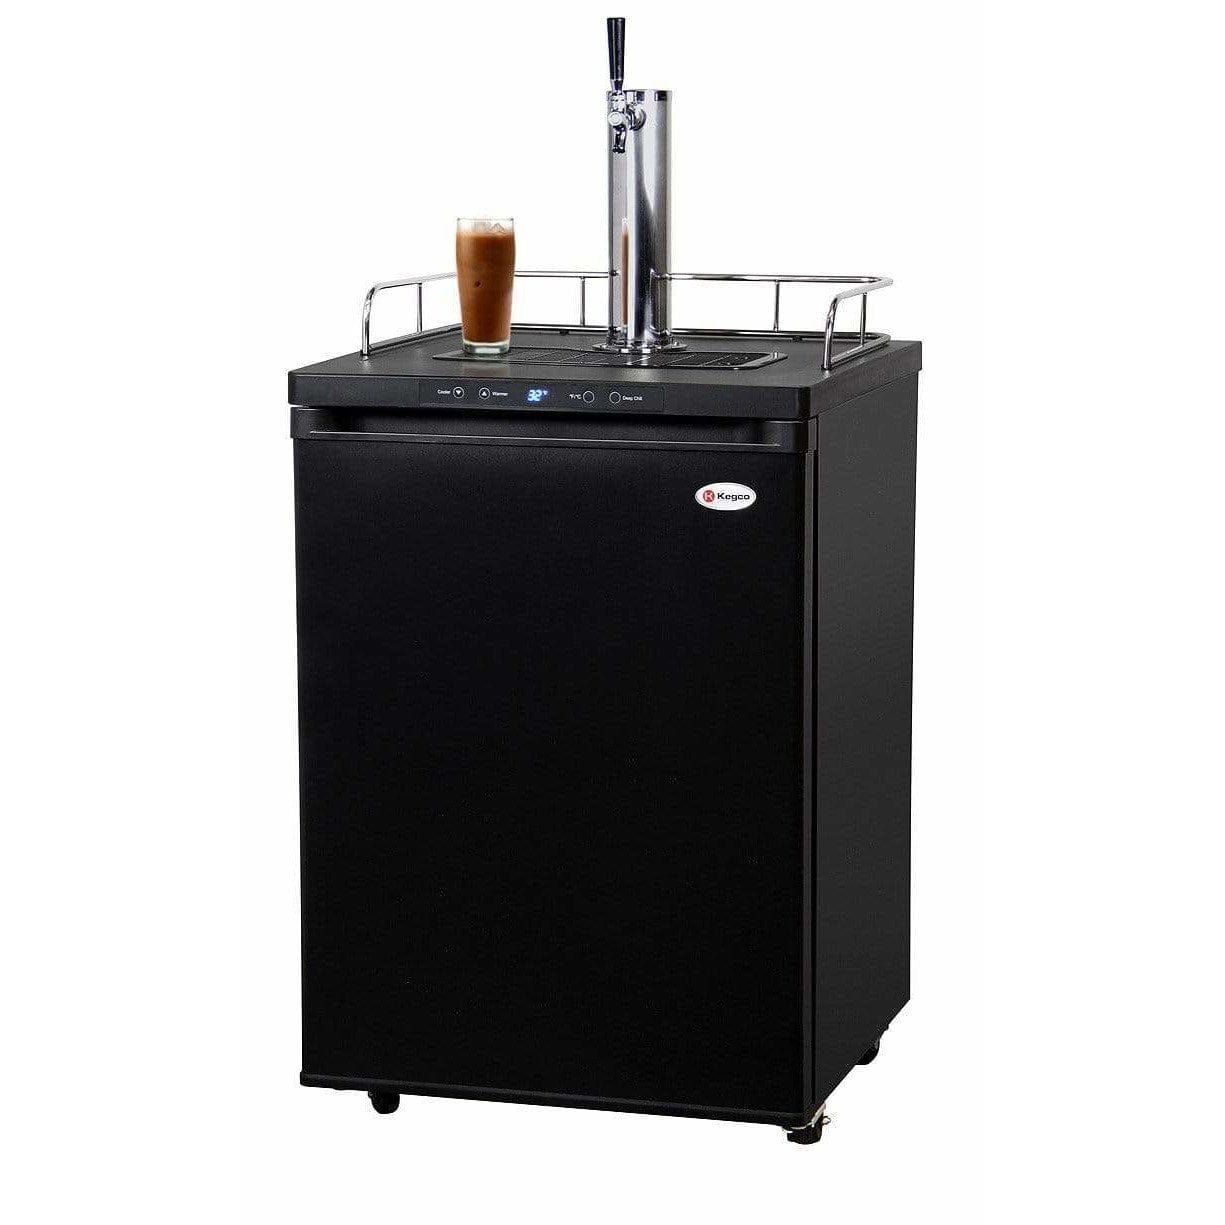 Kegco 24" Wide Cold Brew Coffee Single Tap Black Kegerator ICK30B-1 Wine Coolers Empire